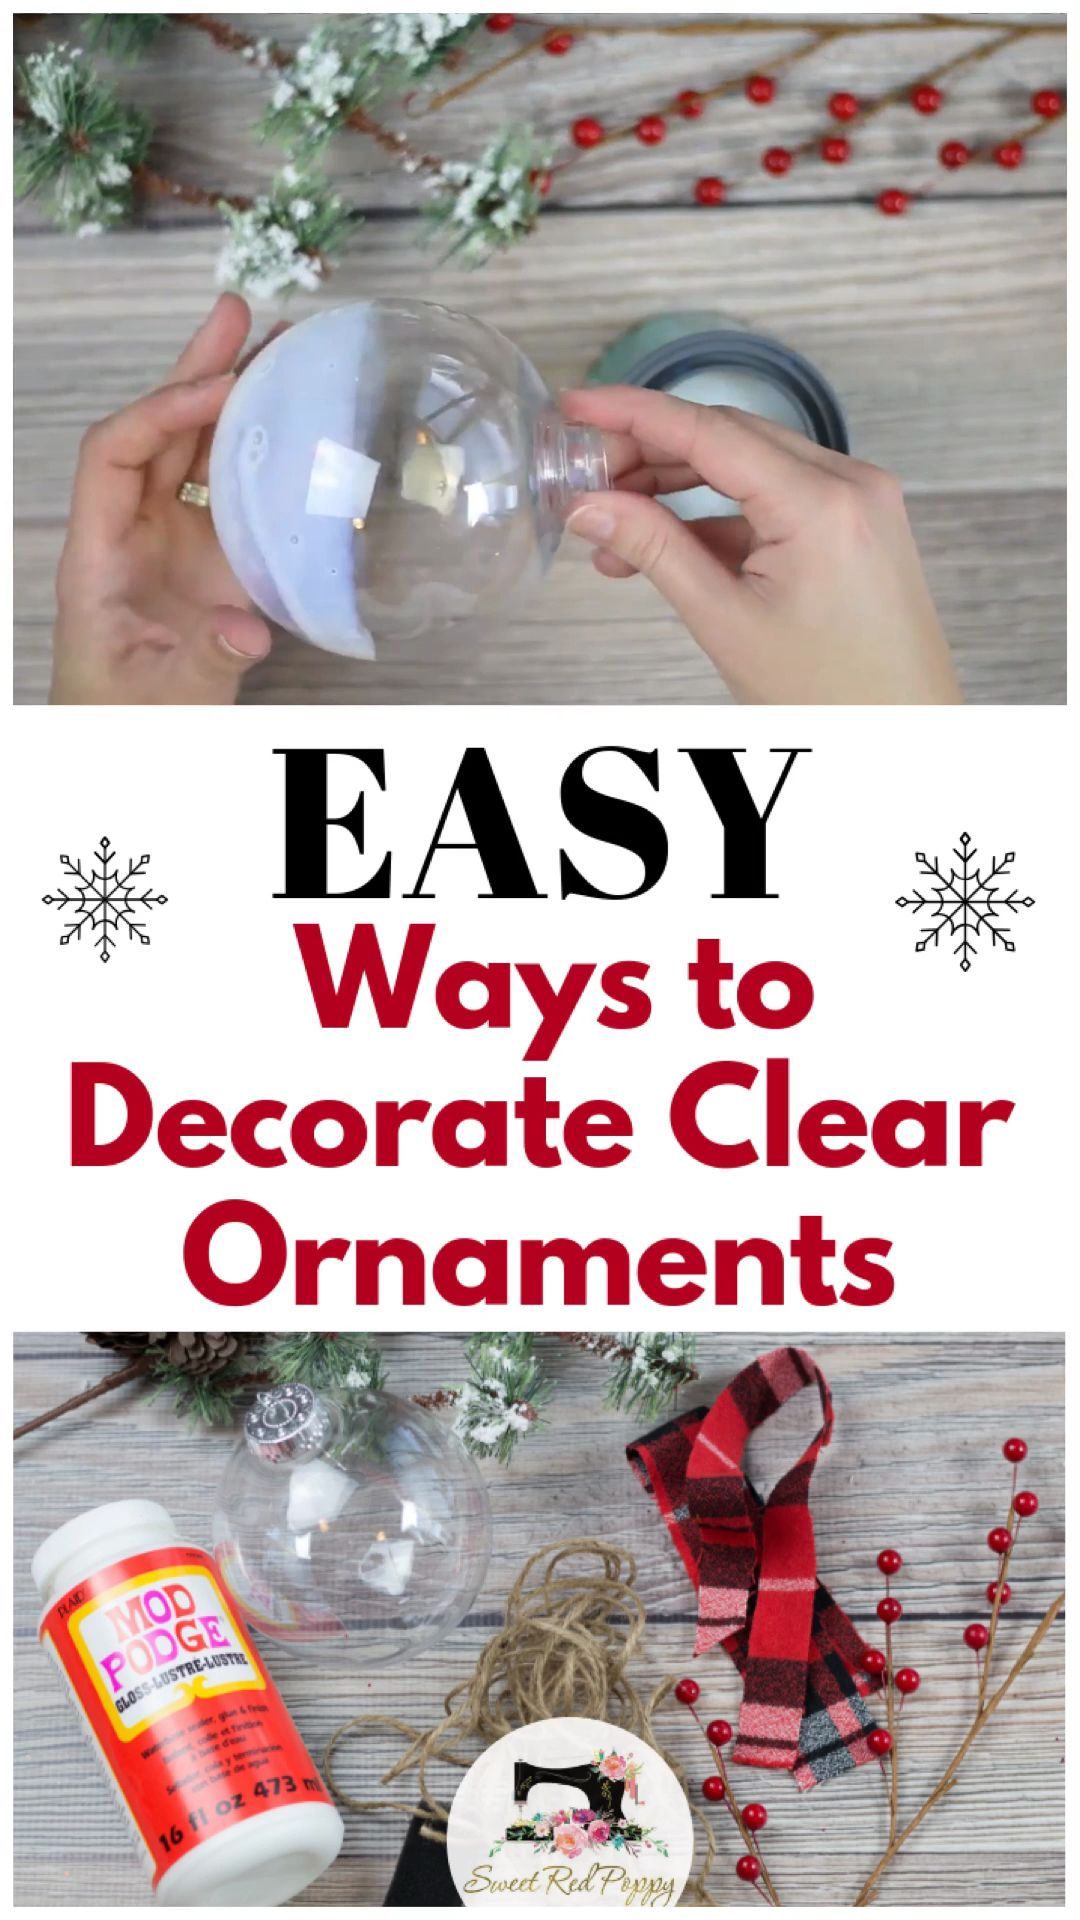 Easy Ways to Decorate Clear Plastic Ornaments for Christmas - Sweet Red Poppy - Easy Ways to Decorate Clear Plastic Ornaments for Christmas - Sweet Red Poppy -   22 diy Christmas mason jars ideas